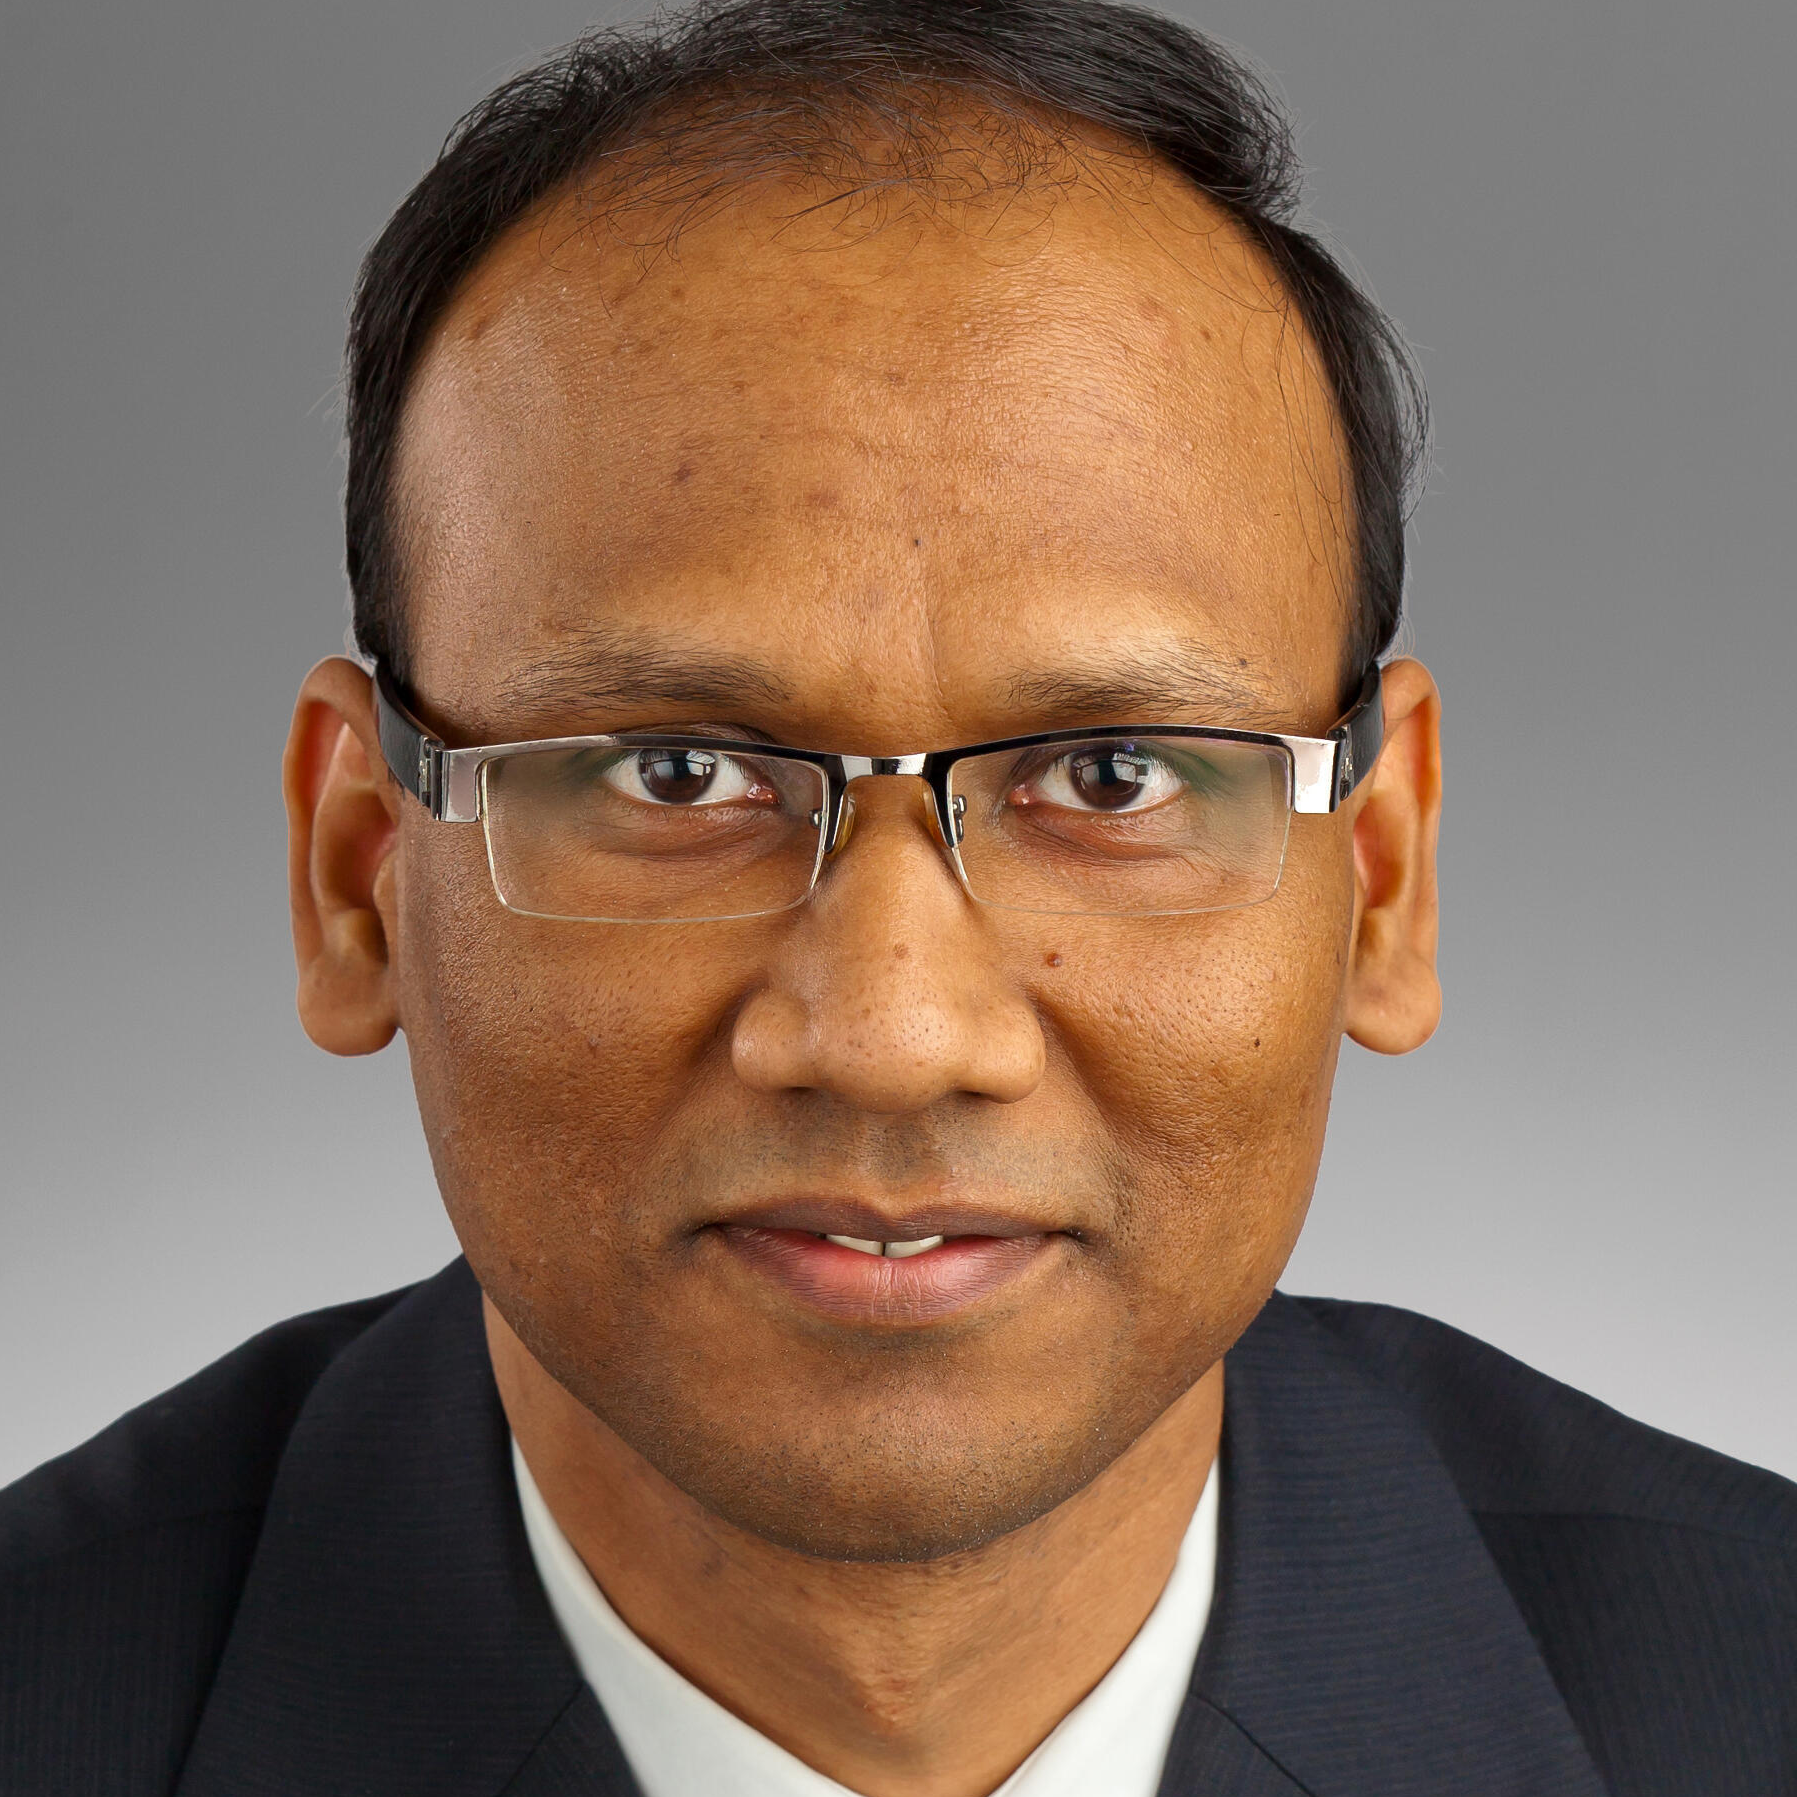 Image of Dr. Arveity Raghavendra Setty, MD, FAAP